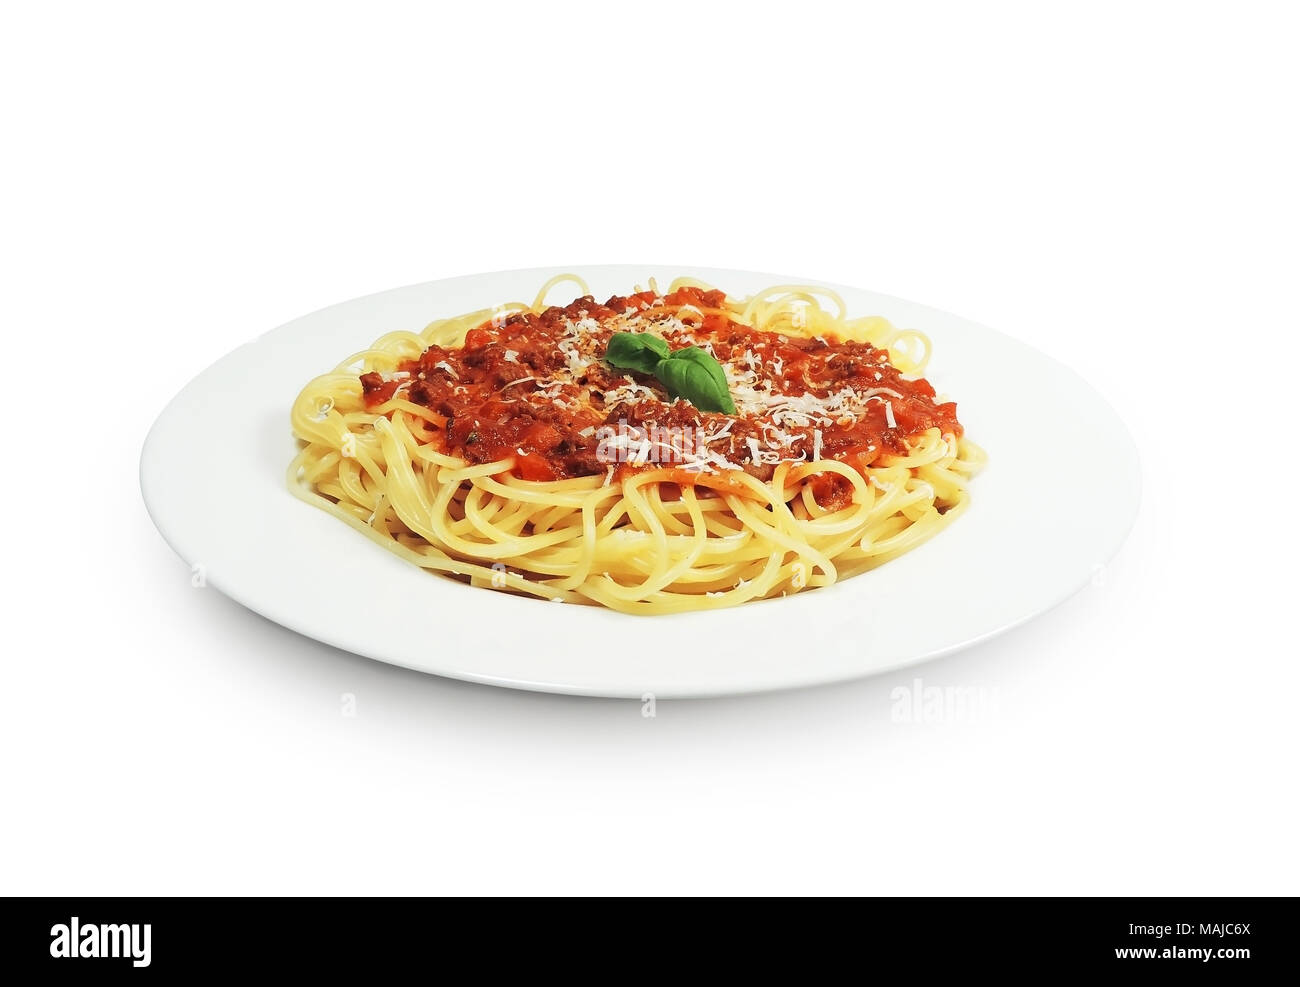 Spaghetti bolognese on a white plate with basil leaf, isolated on white background. Italian cuisine, traditional food. Stock Photo